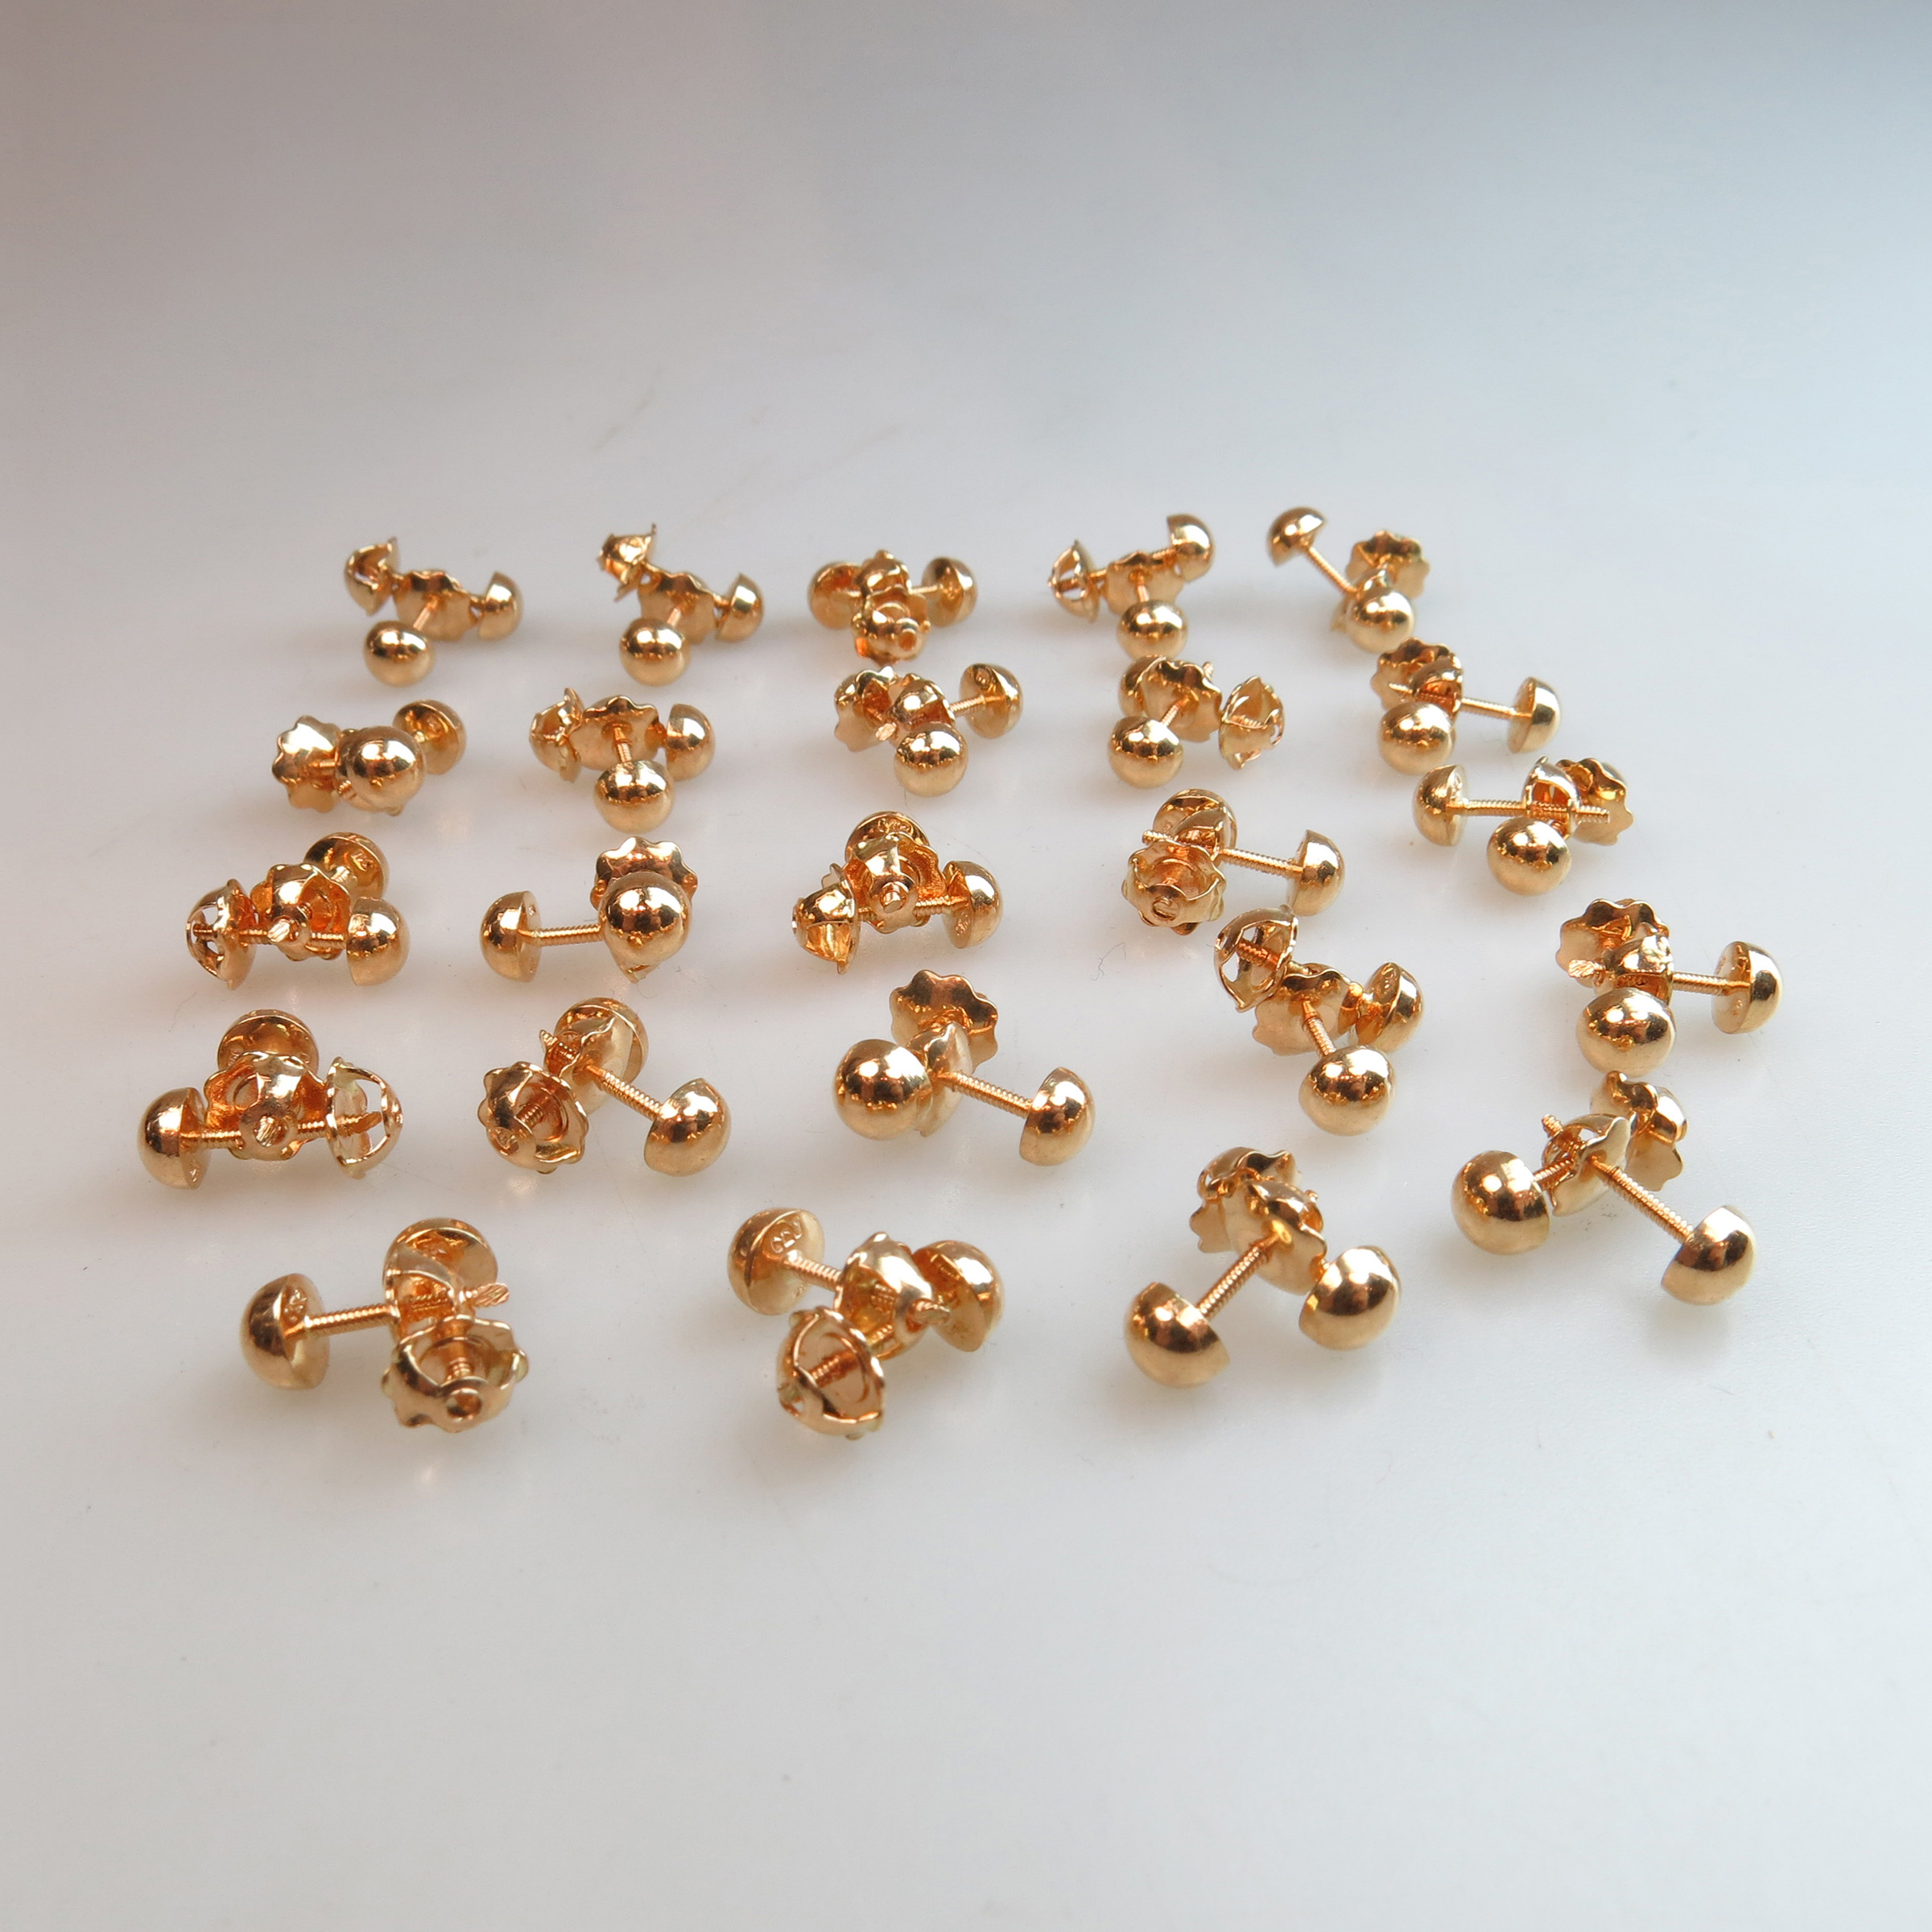 24 x Pairs Of 18K Yellow Gold Stud Earrings